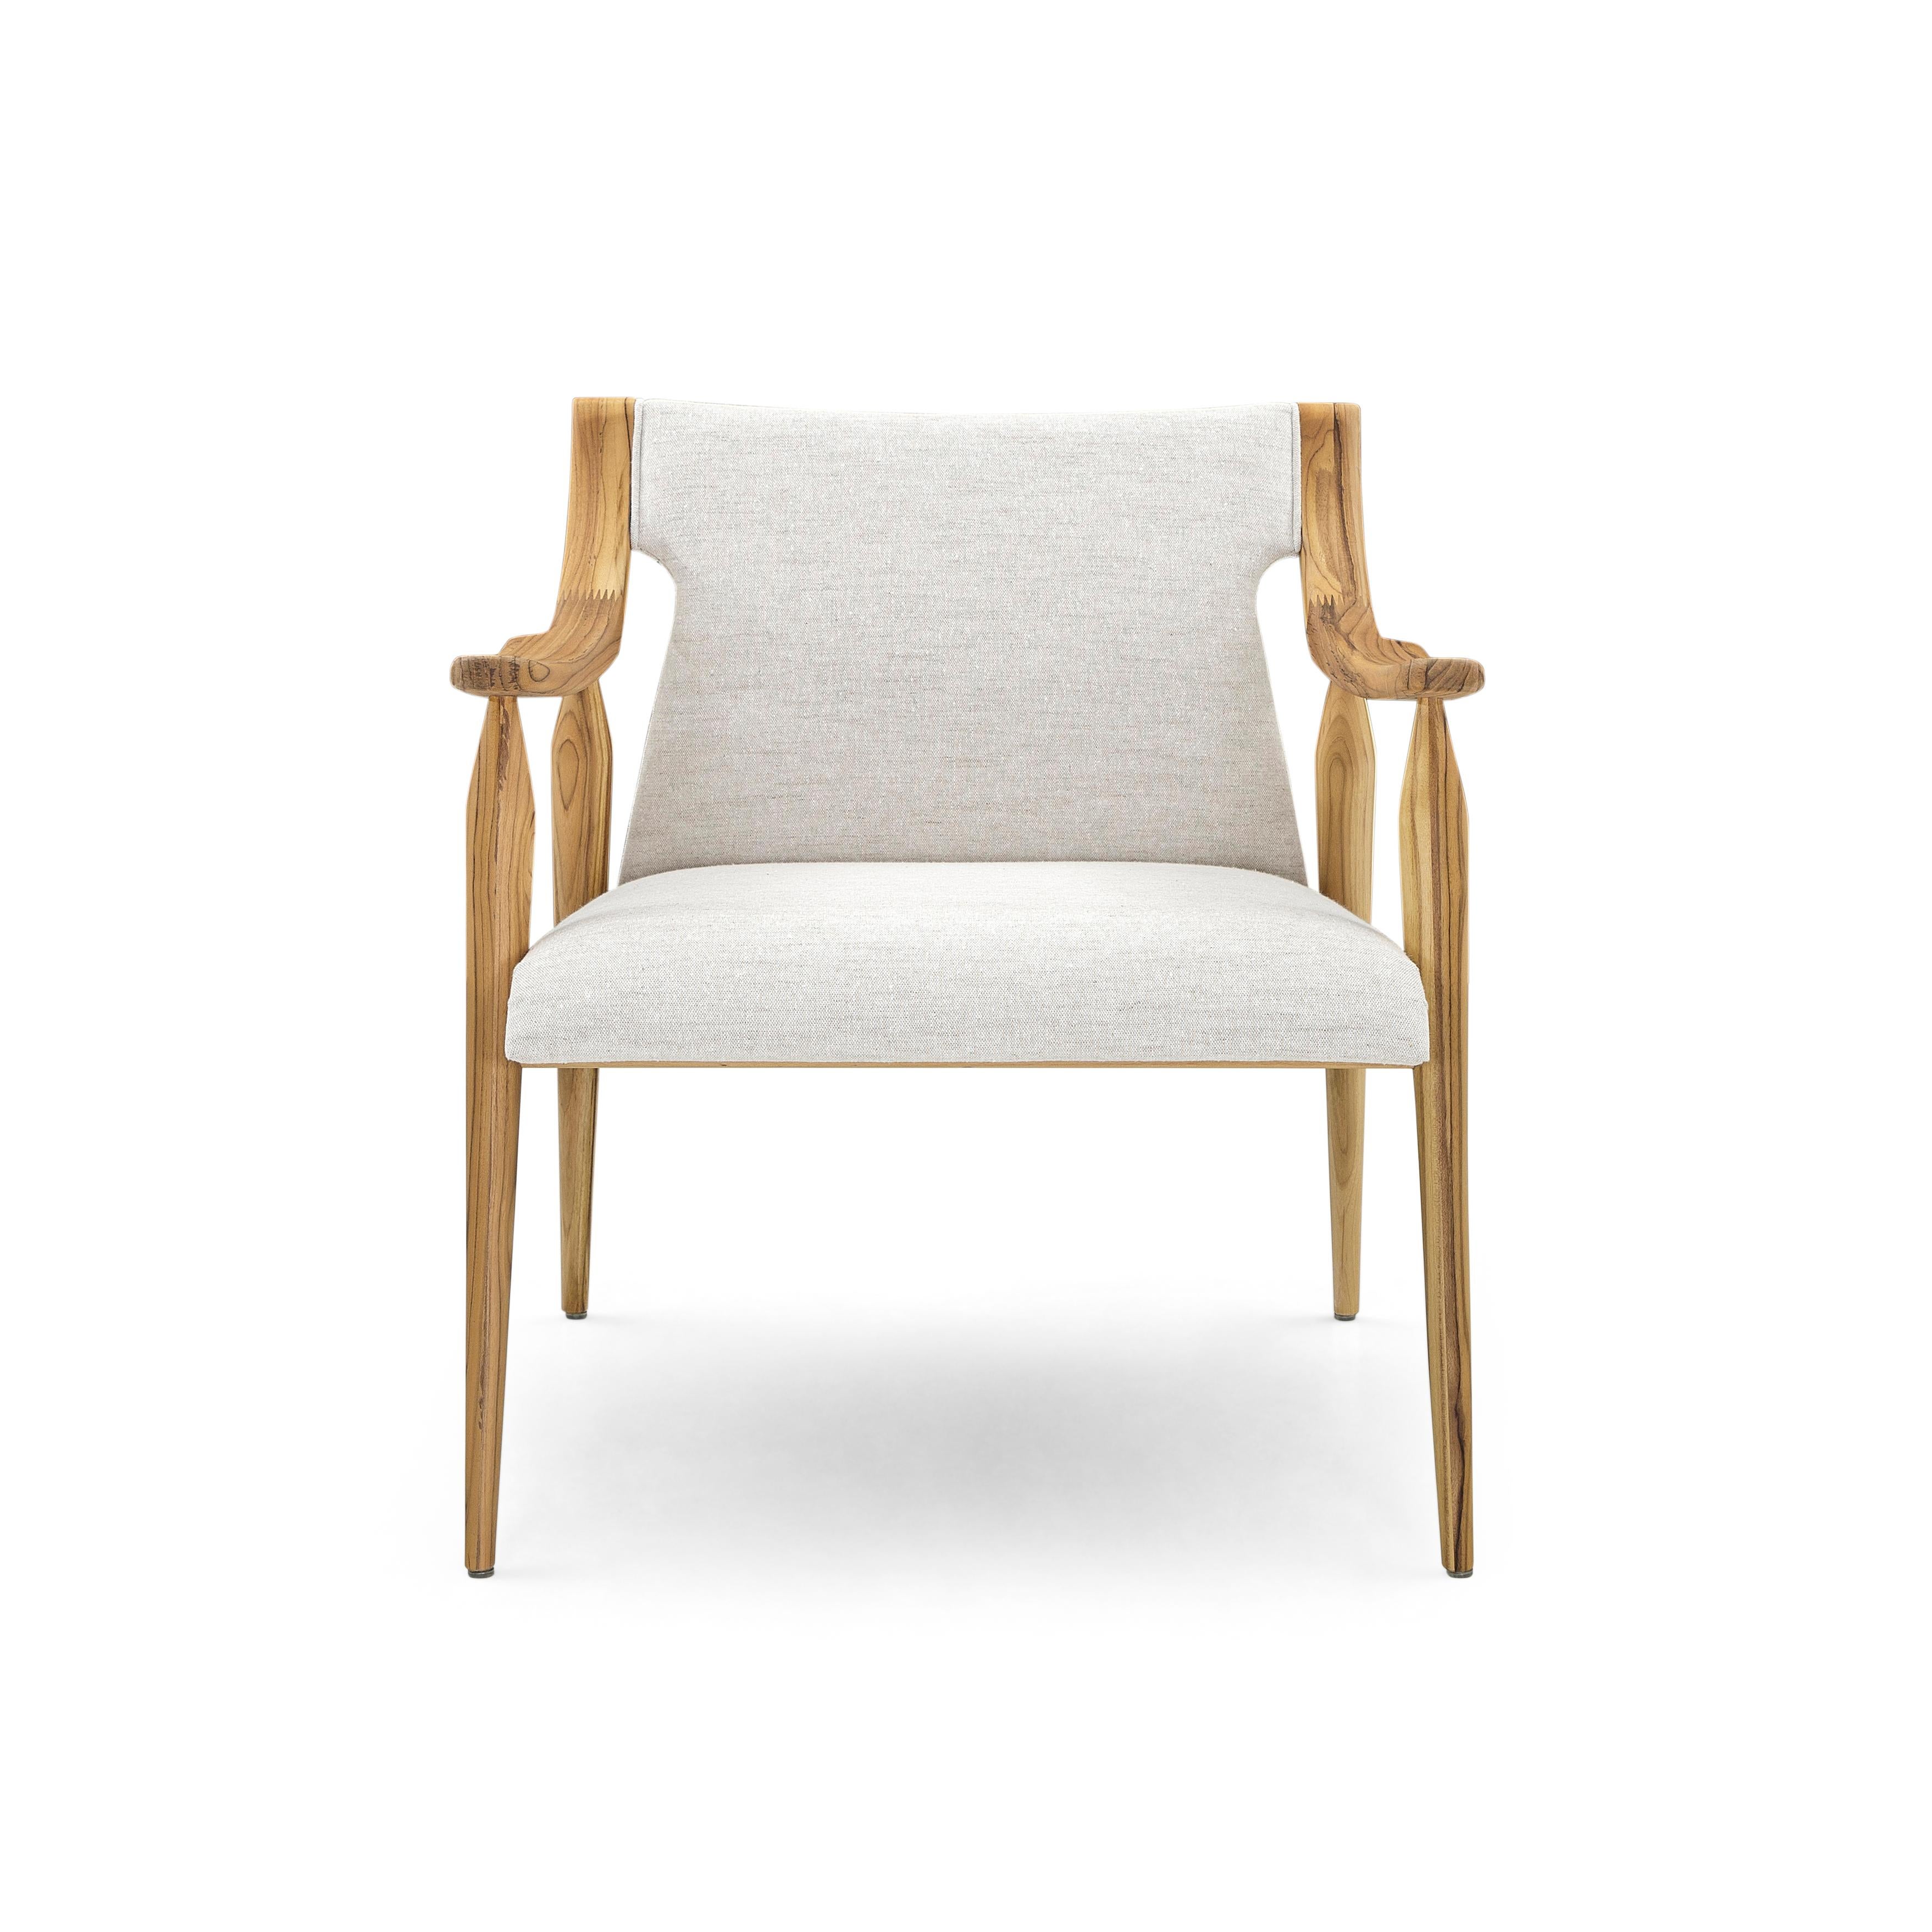 Mince Armchair Featuring Curved Arms and Spindle Legs in Teak Wood Finish For Sale 2